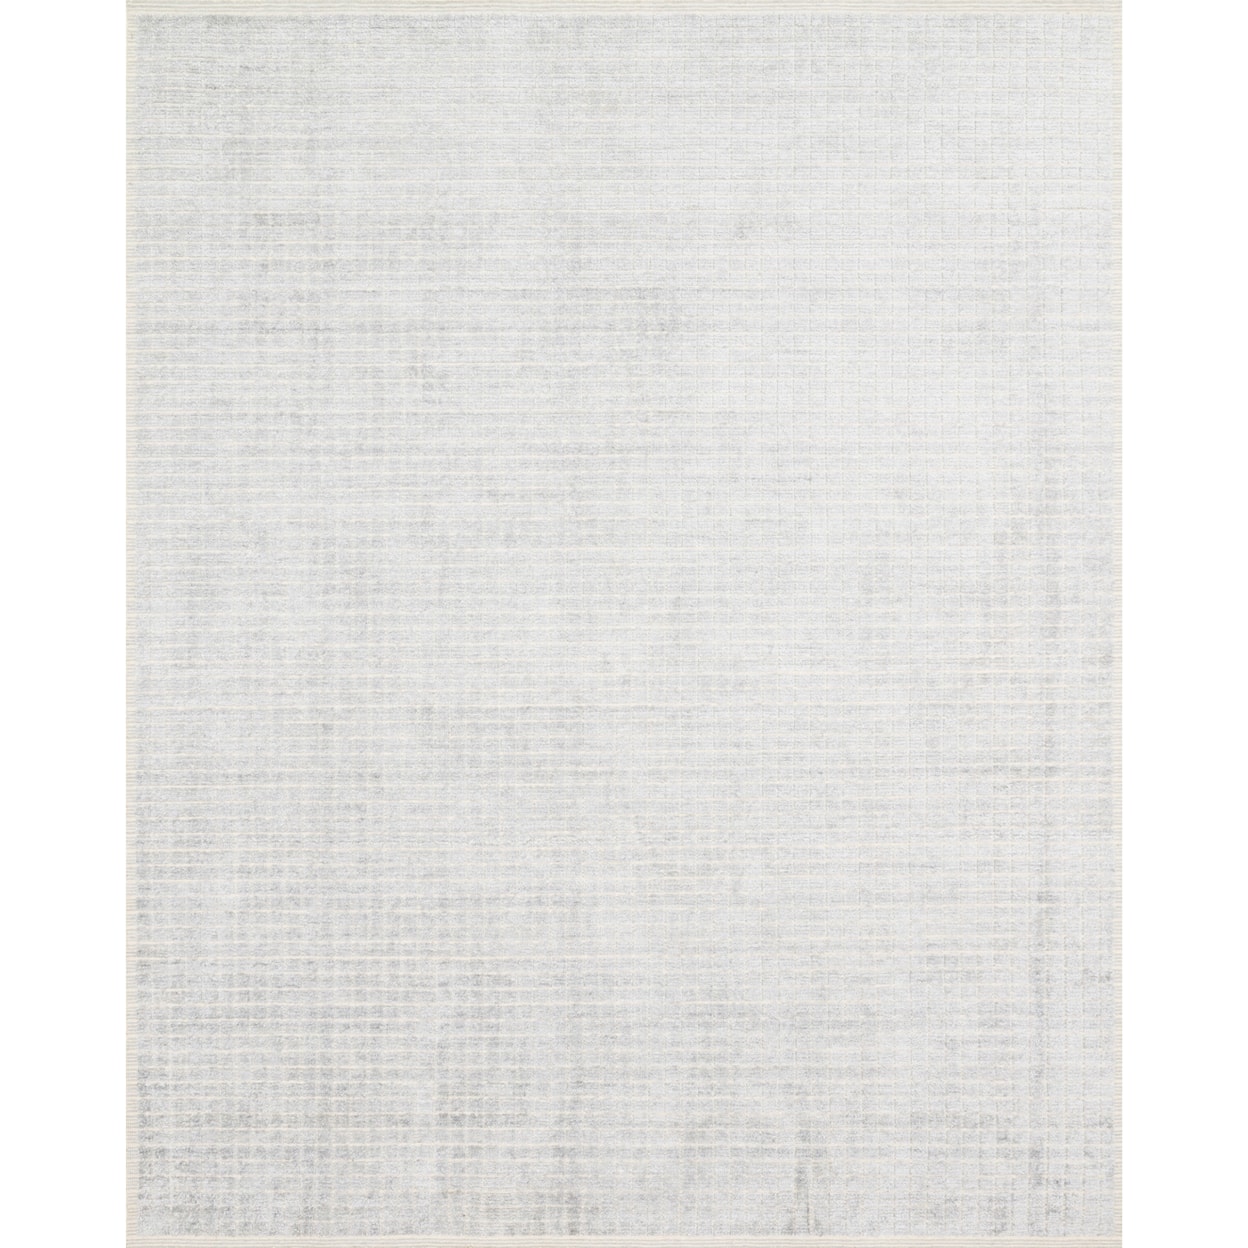 Reeds Rugs Beverly 5'6" x 8'6" Silver / Sky Rug